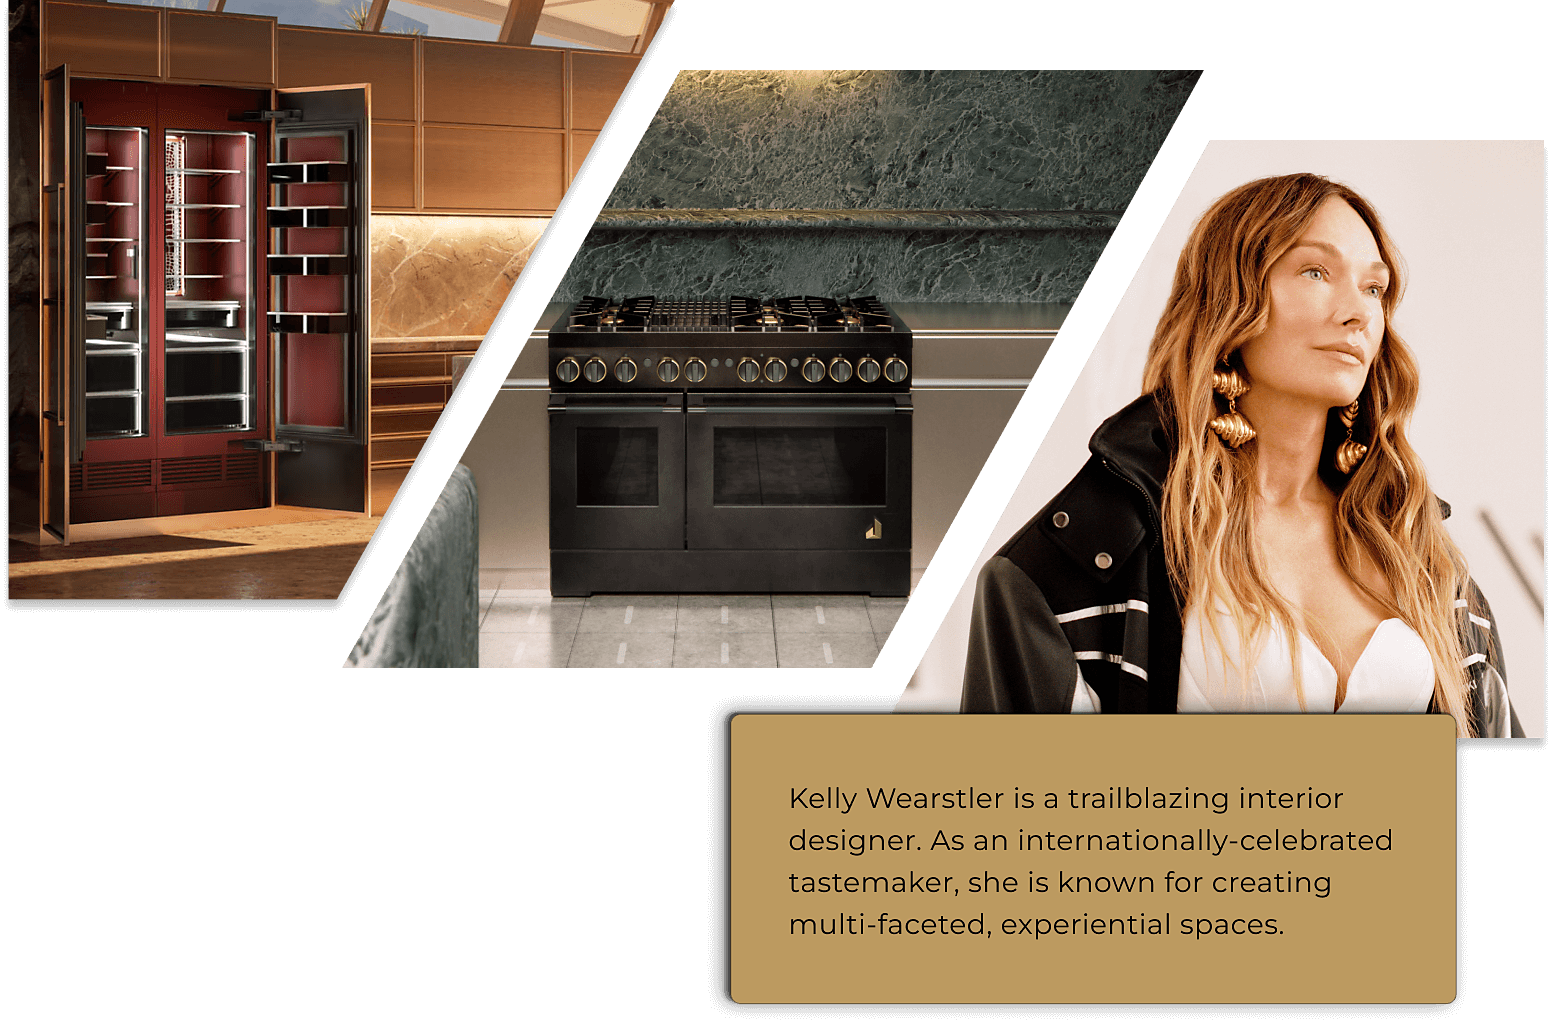 An image of Kelly Wearstler overlayed with two kitchens she designed for the limited-edition statement pieces. 